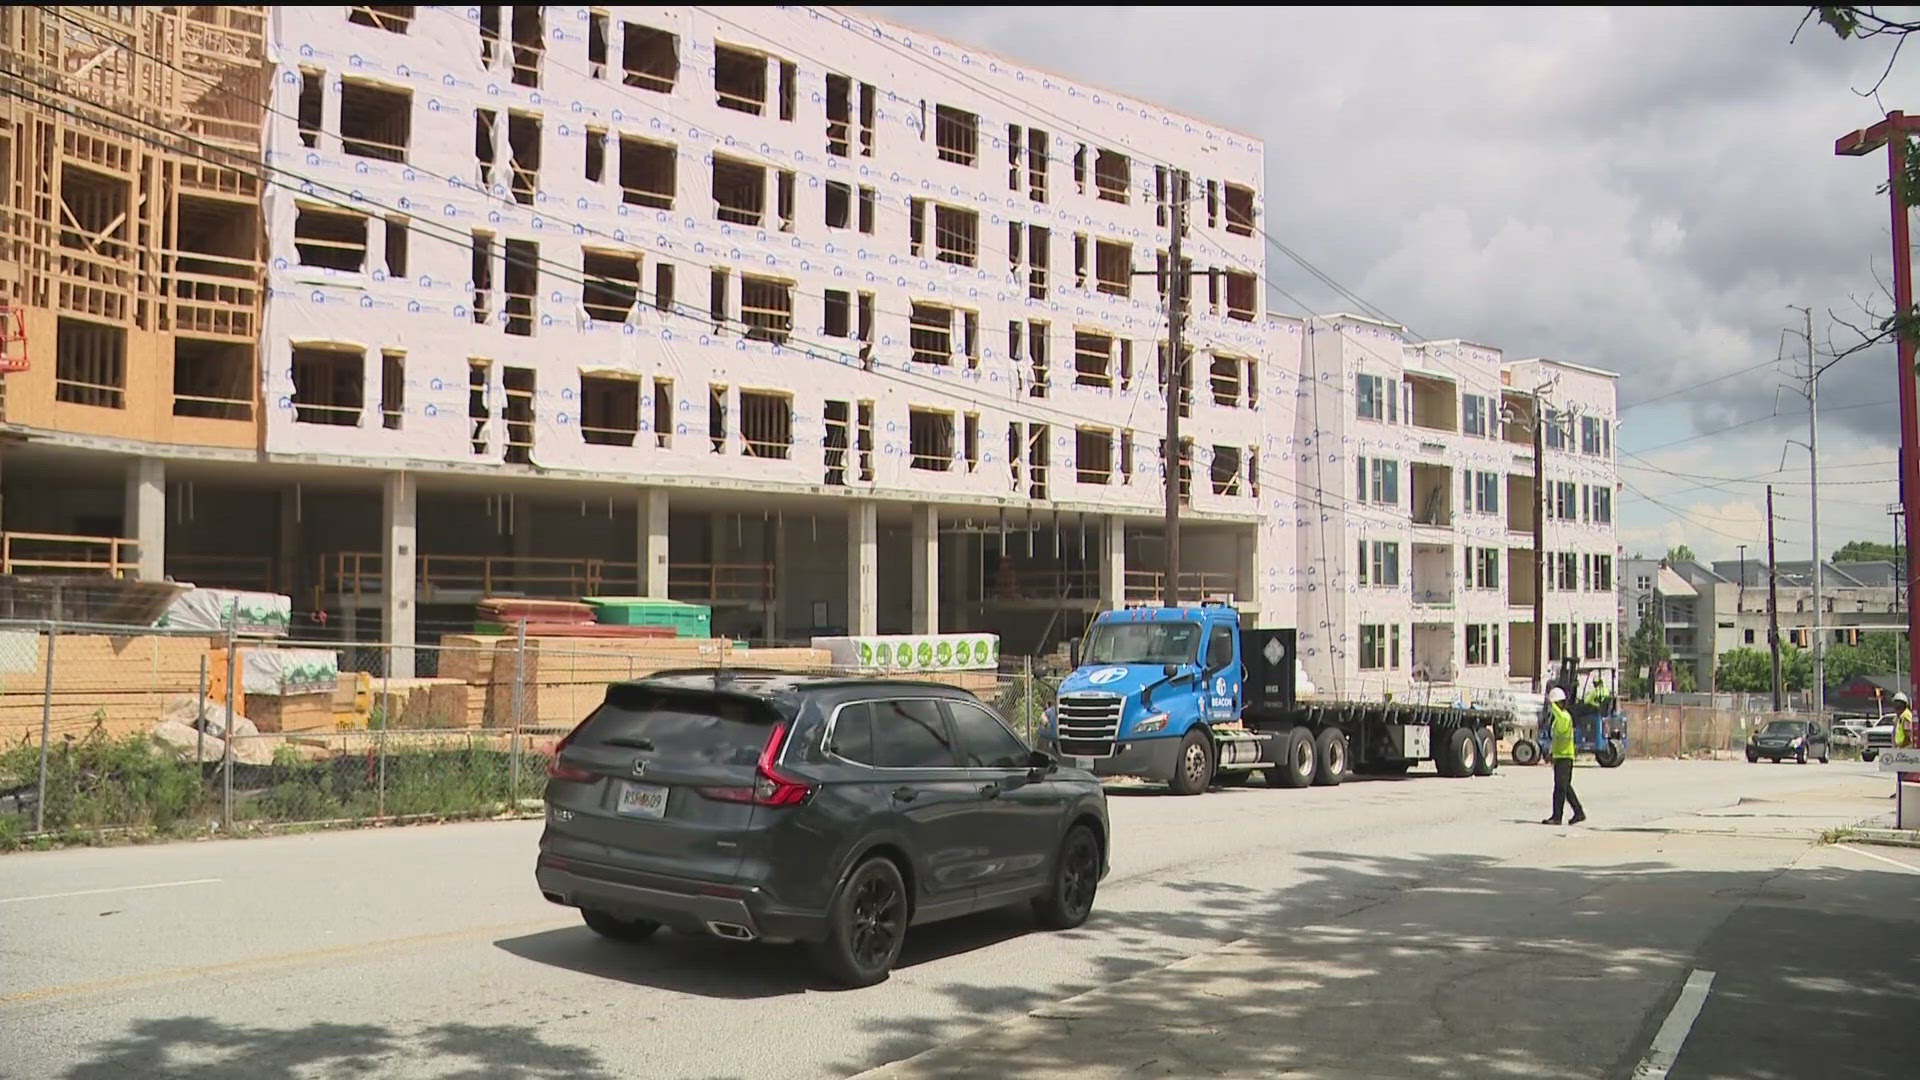 11Alive is diving into why renters are saving more money and will continue to save in metro Atlanta.